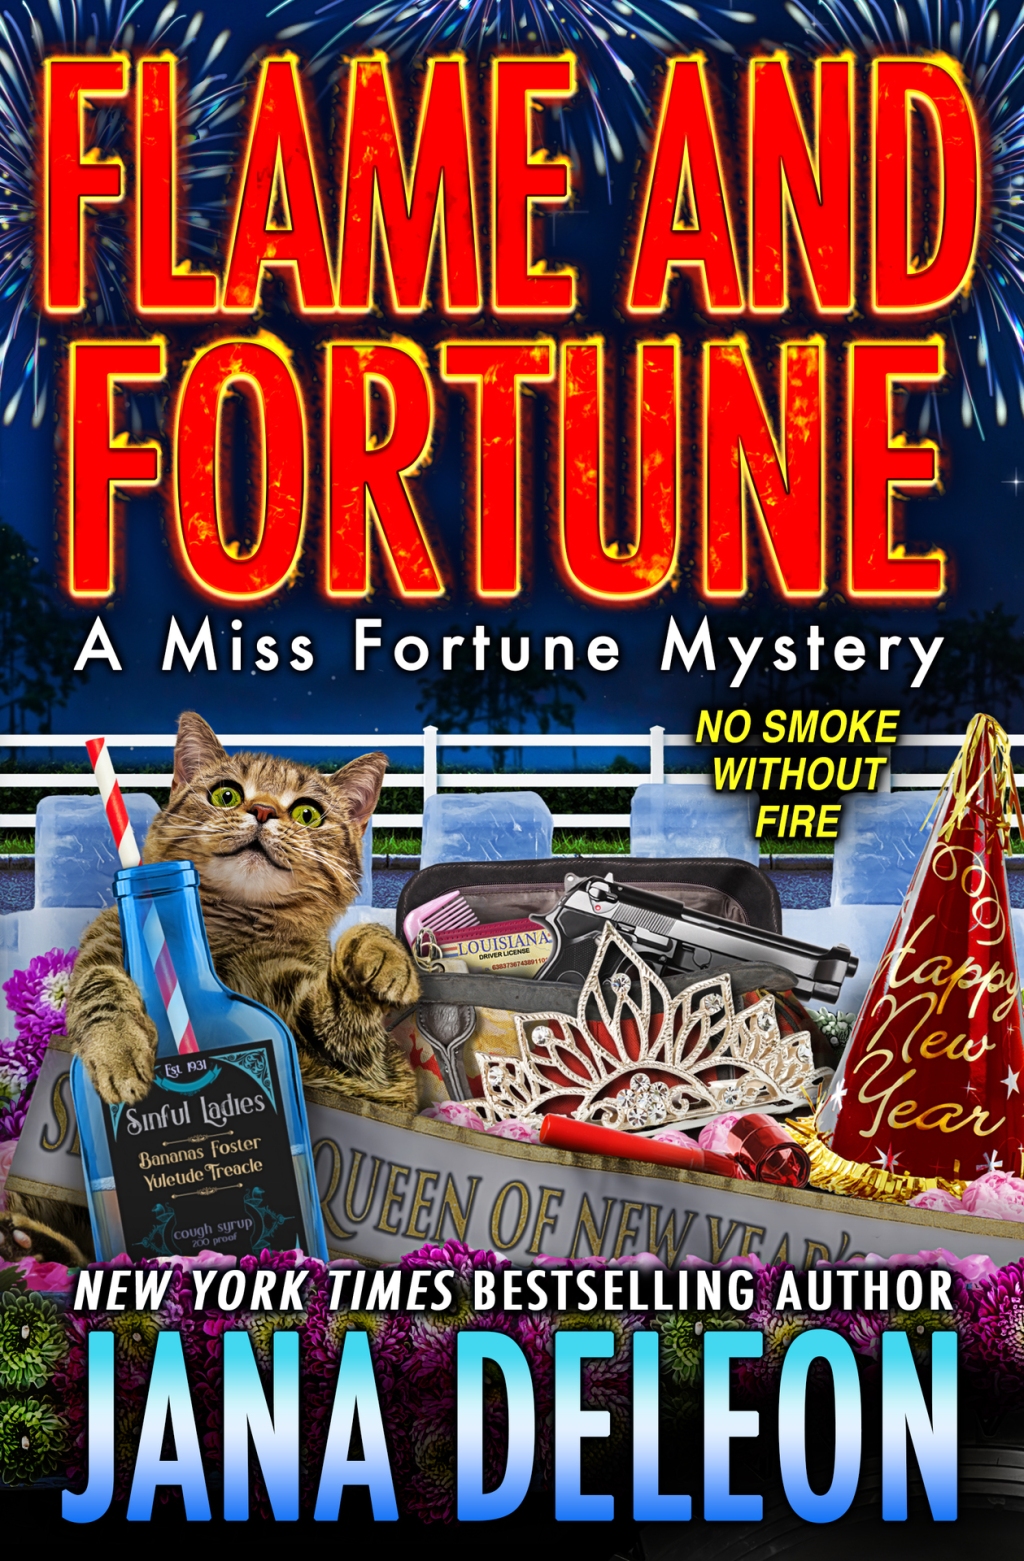 Flame and Fortune – Okay instalment in the series.